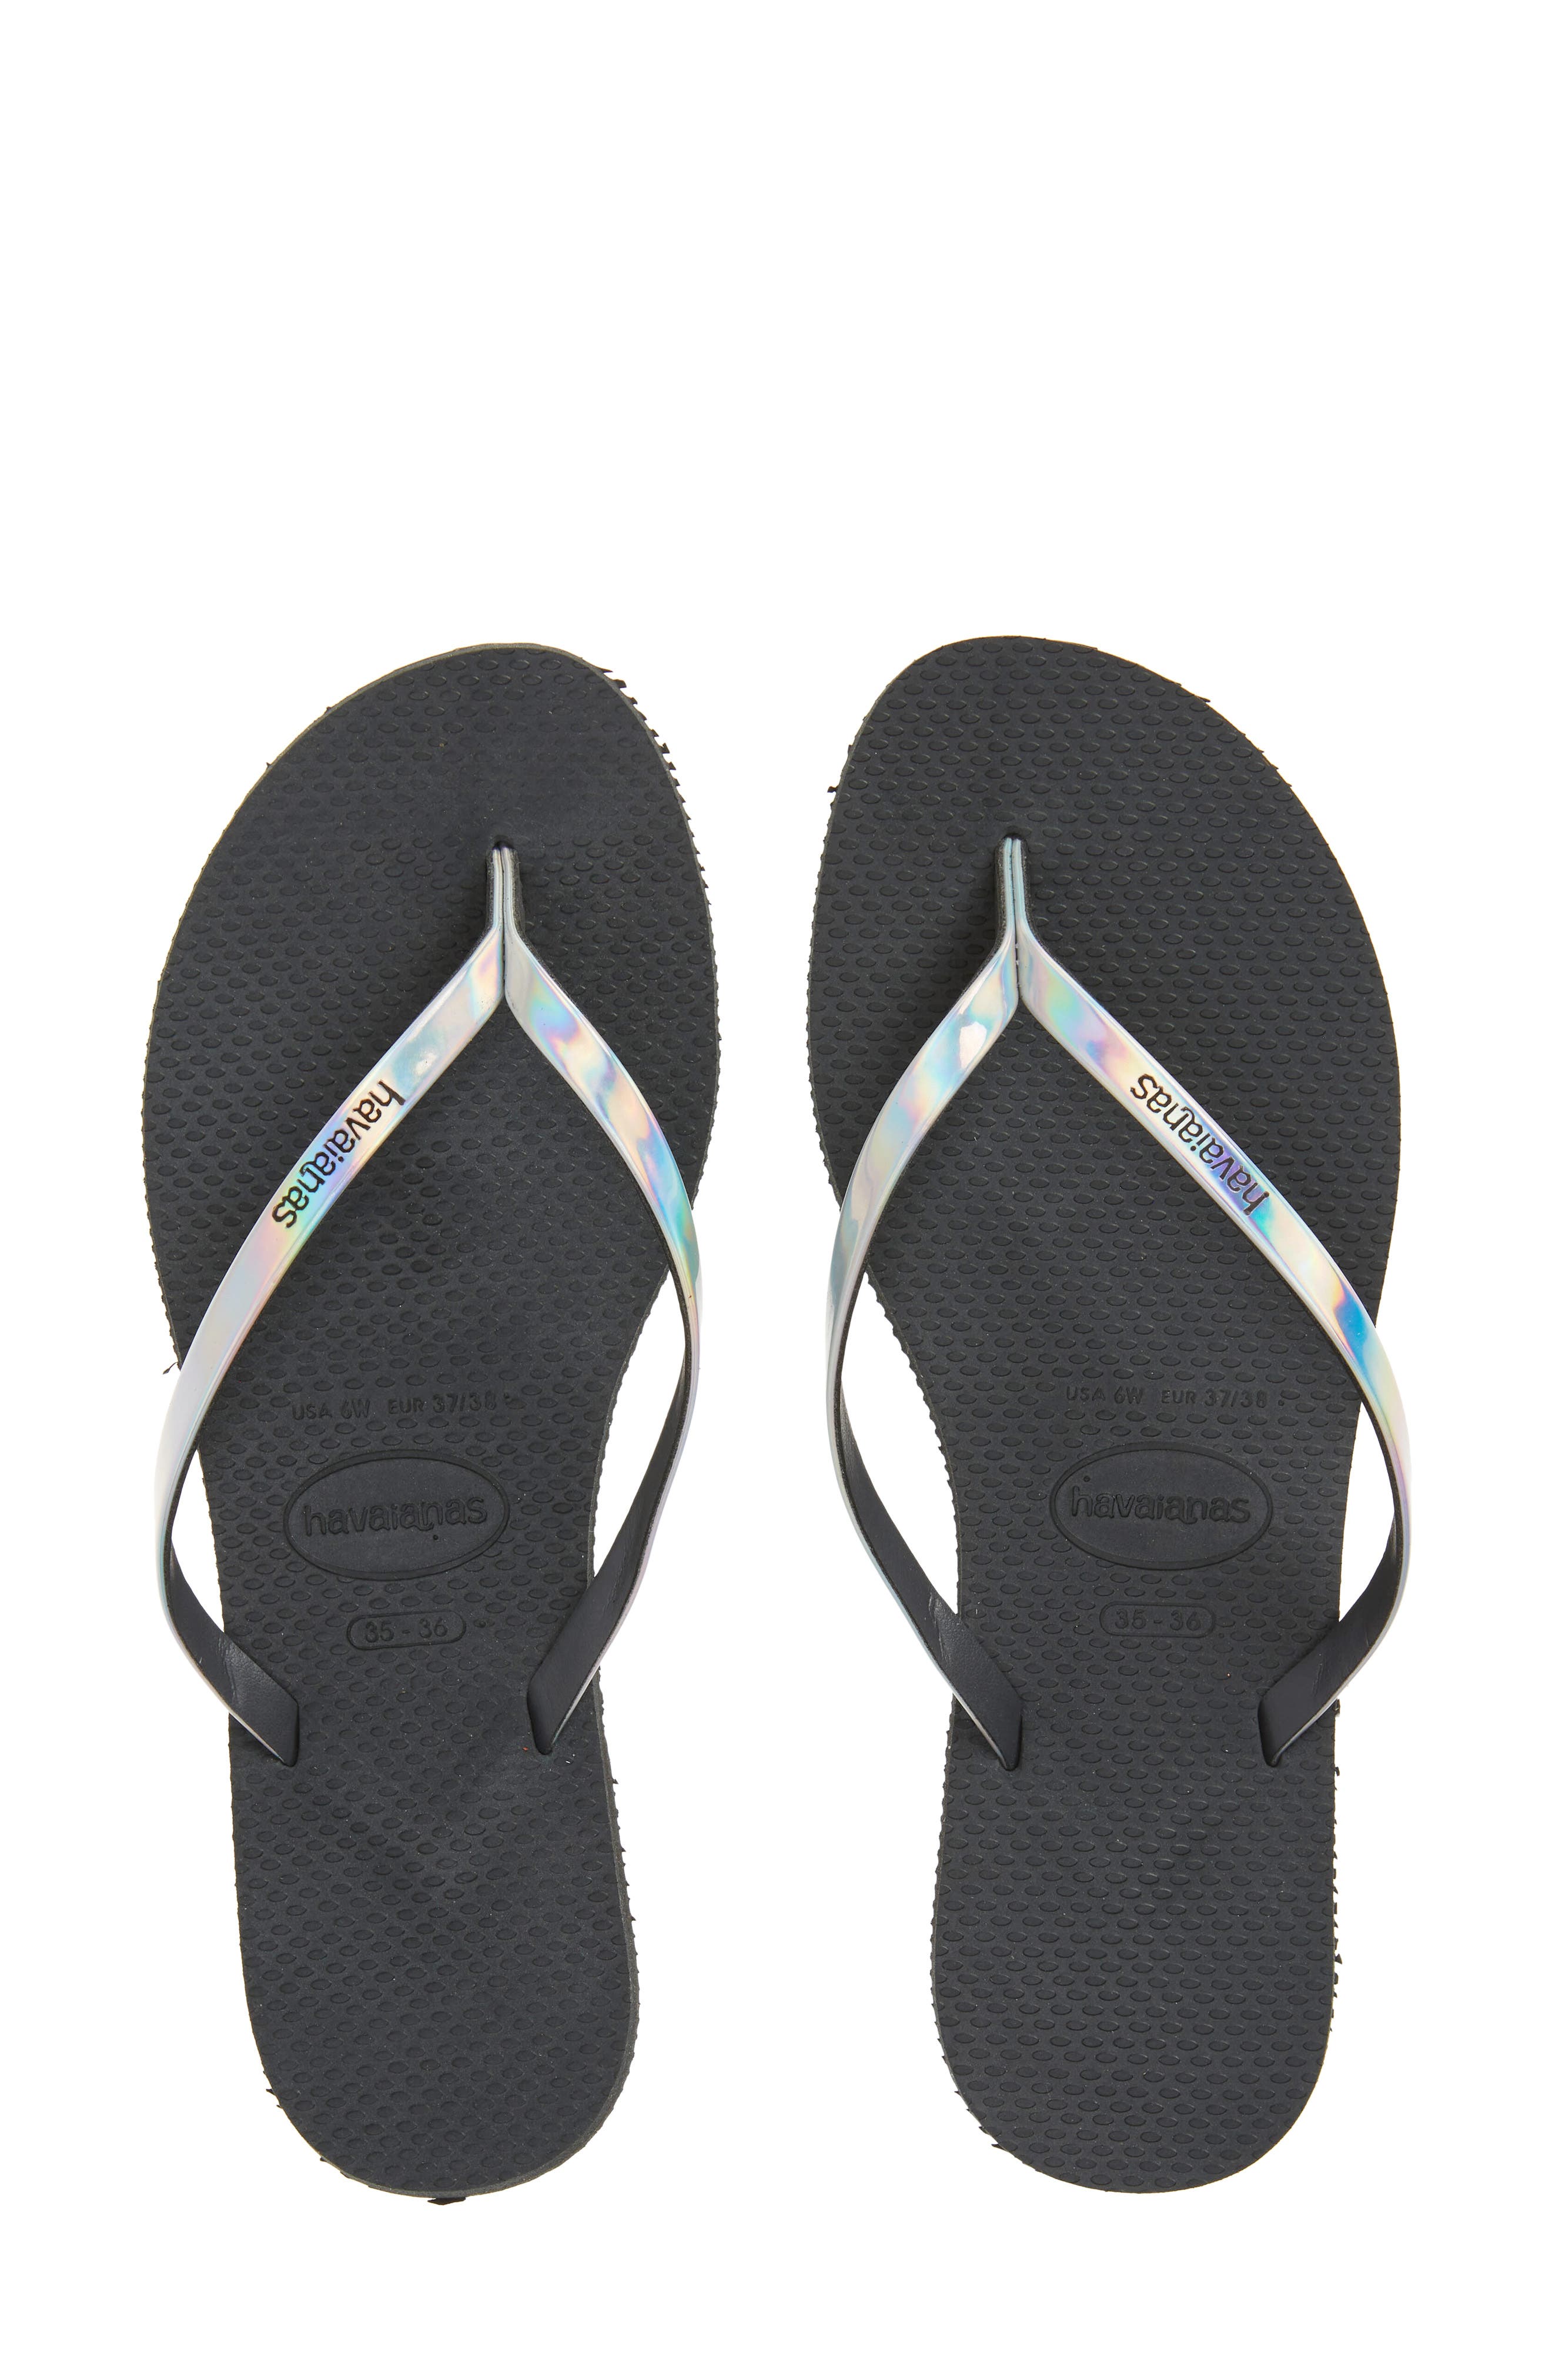 Havaianas Women's Freedom Sandals Assorted Sizes Colors 